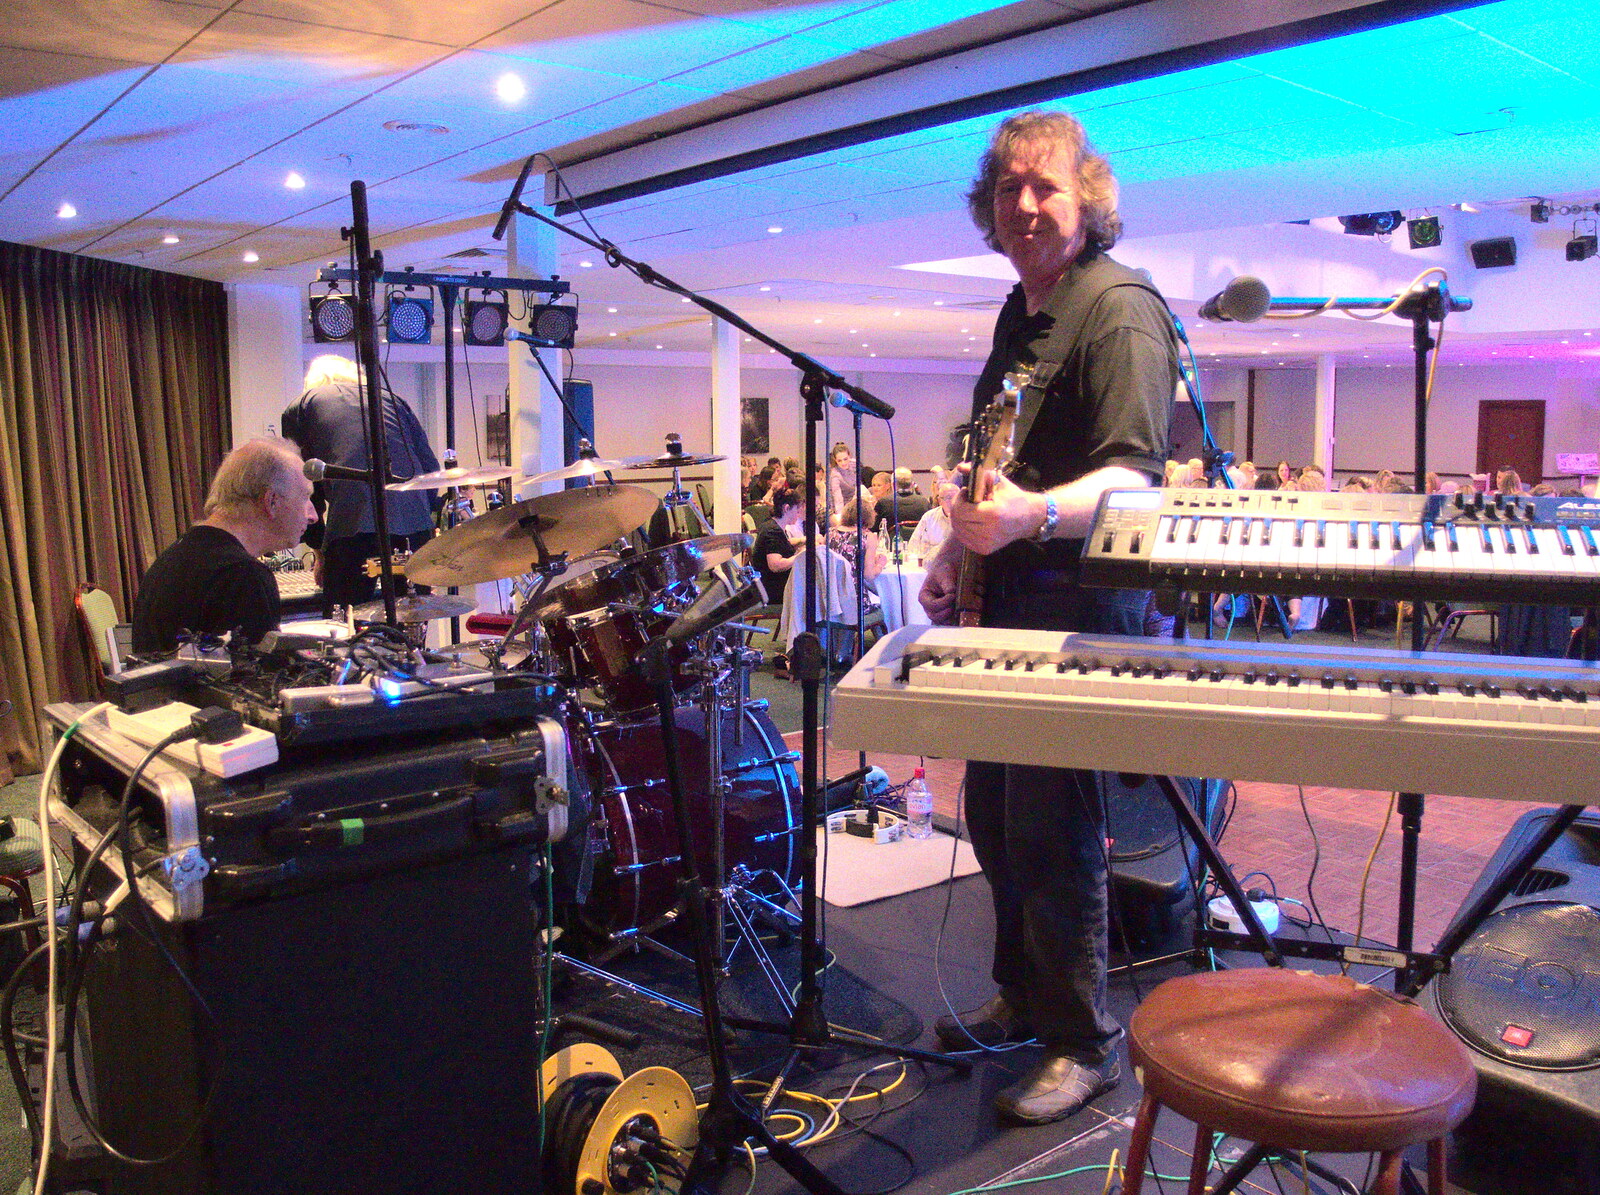 Max tunes up from The BBs at Centre Parcs, Elvedon, Norfolk - 5th November 2015